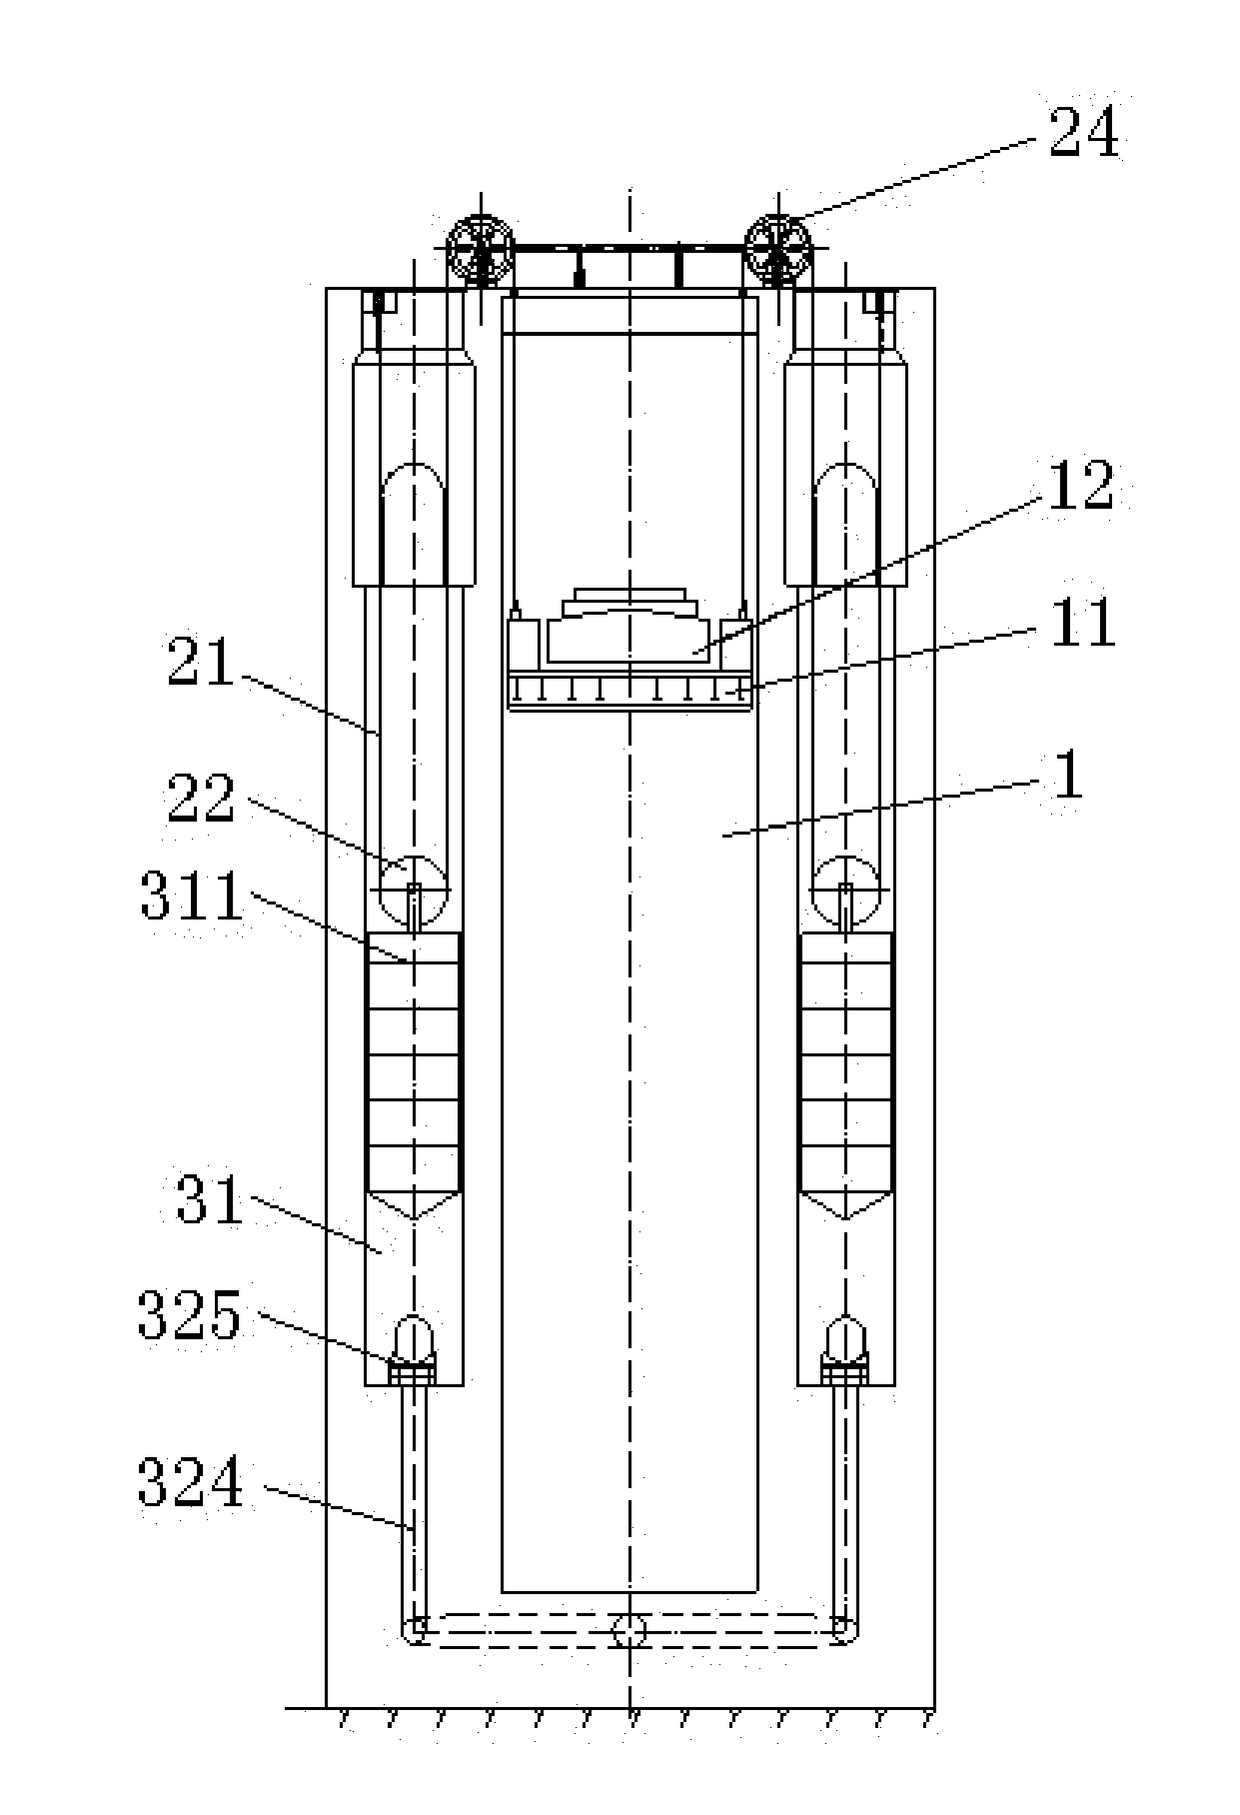 Hydraulic ship lift with Anti-overturning capability and method for using the same